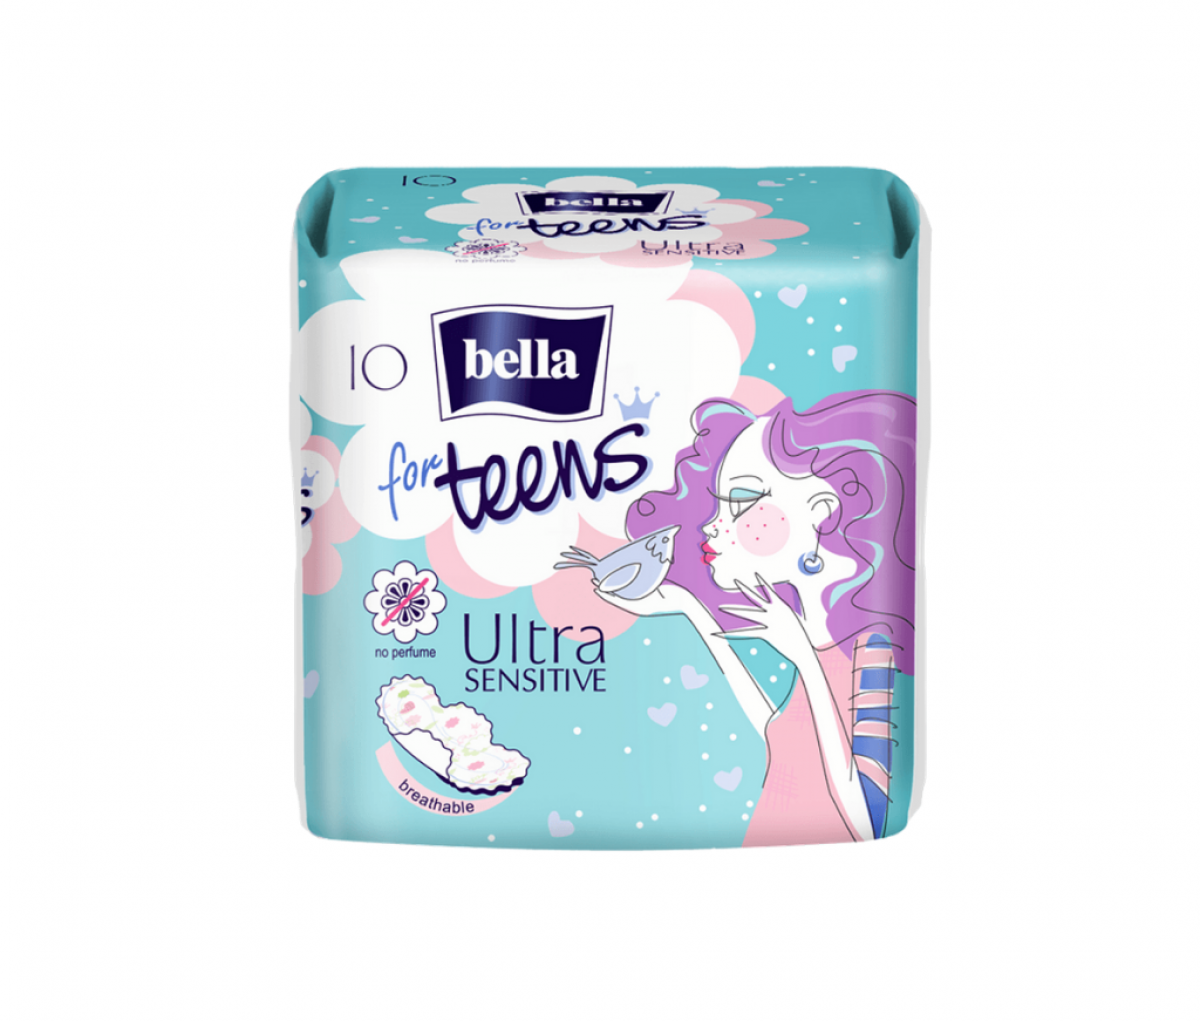 TZMO Bella for Teens Ultra Sensitive Sanitary Pads A10